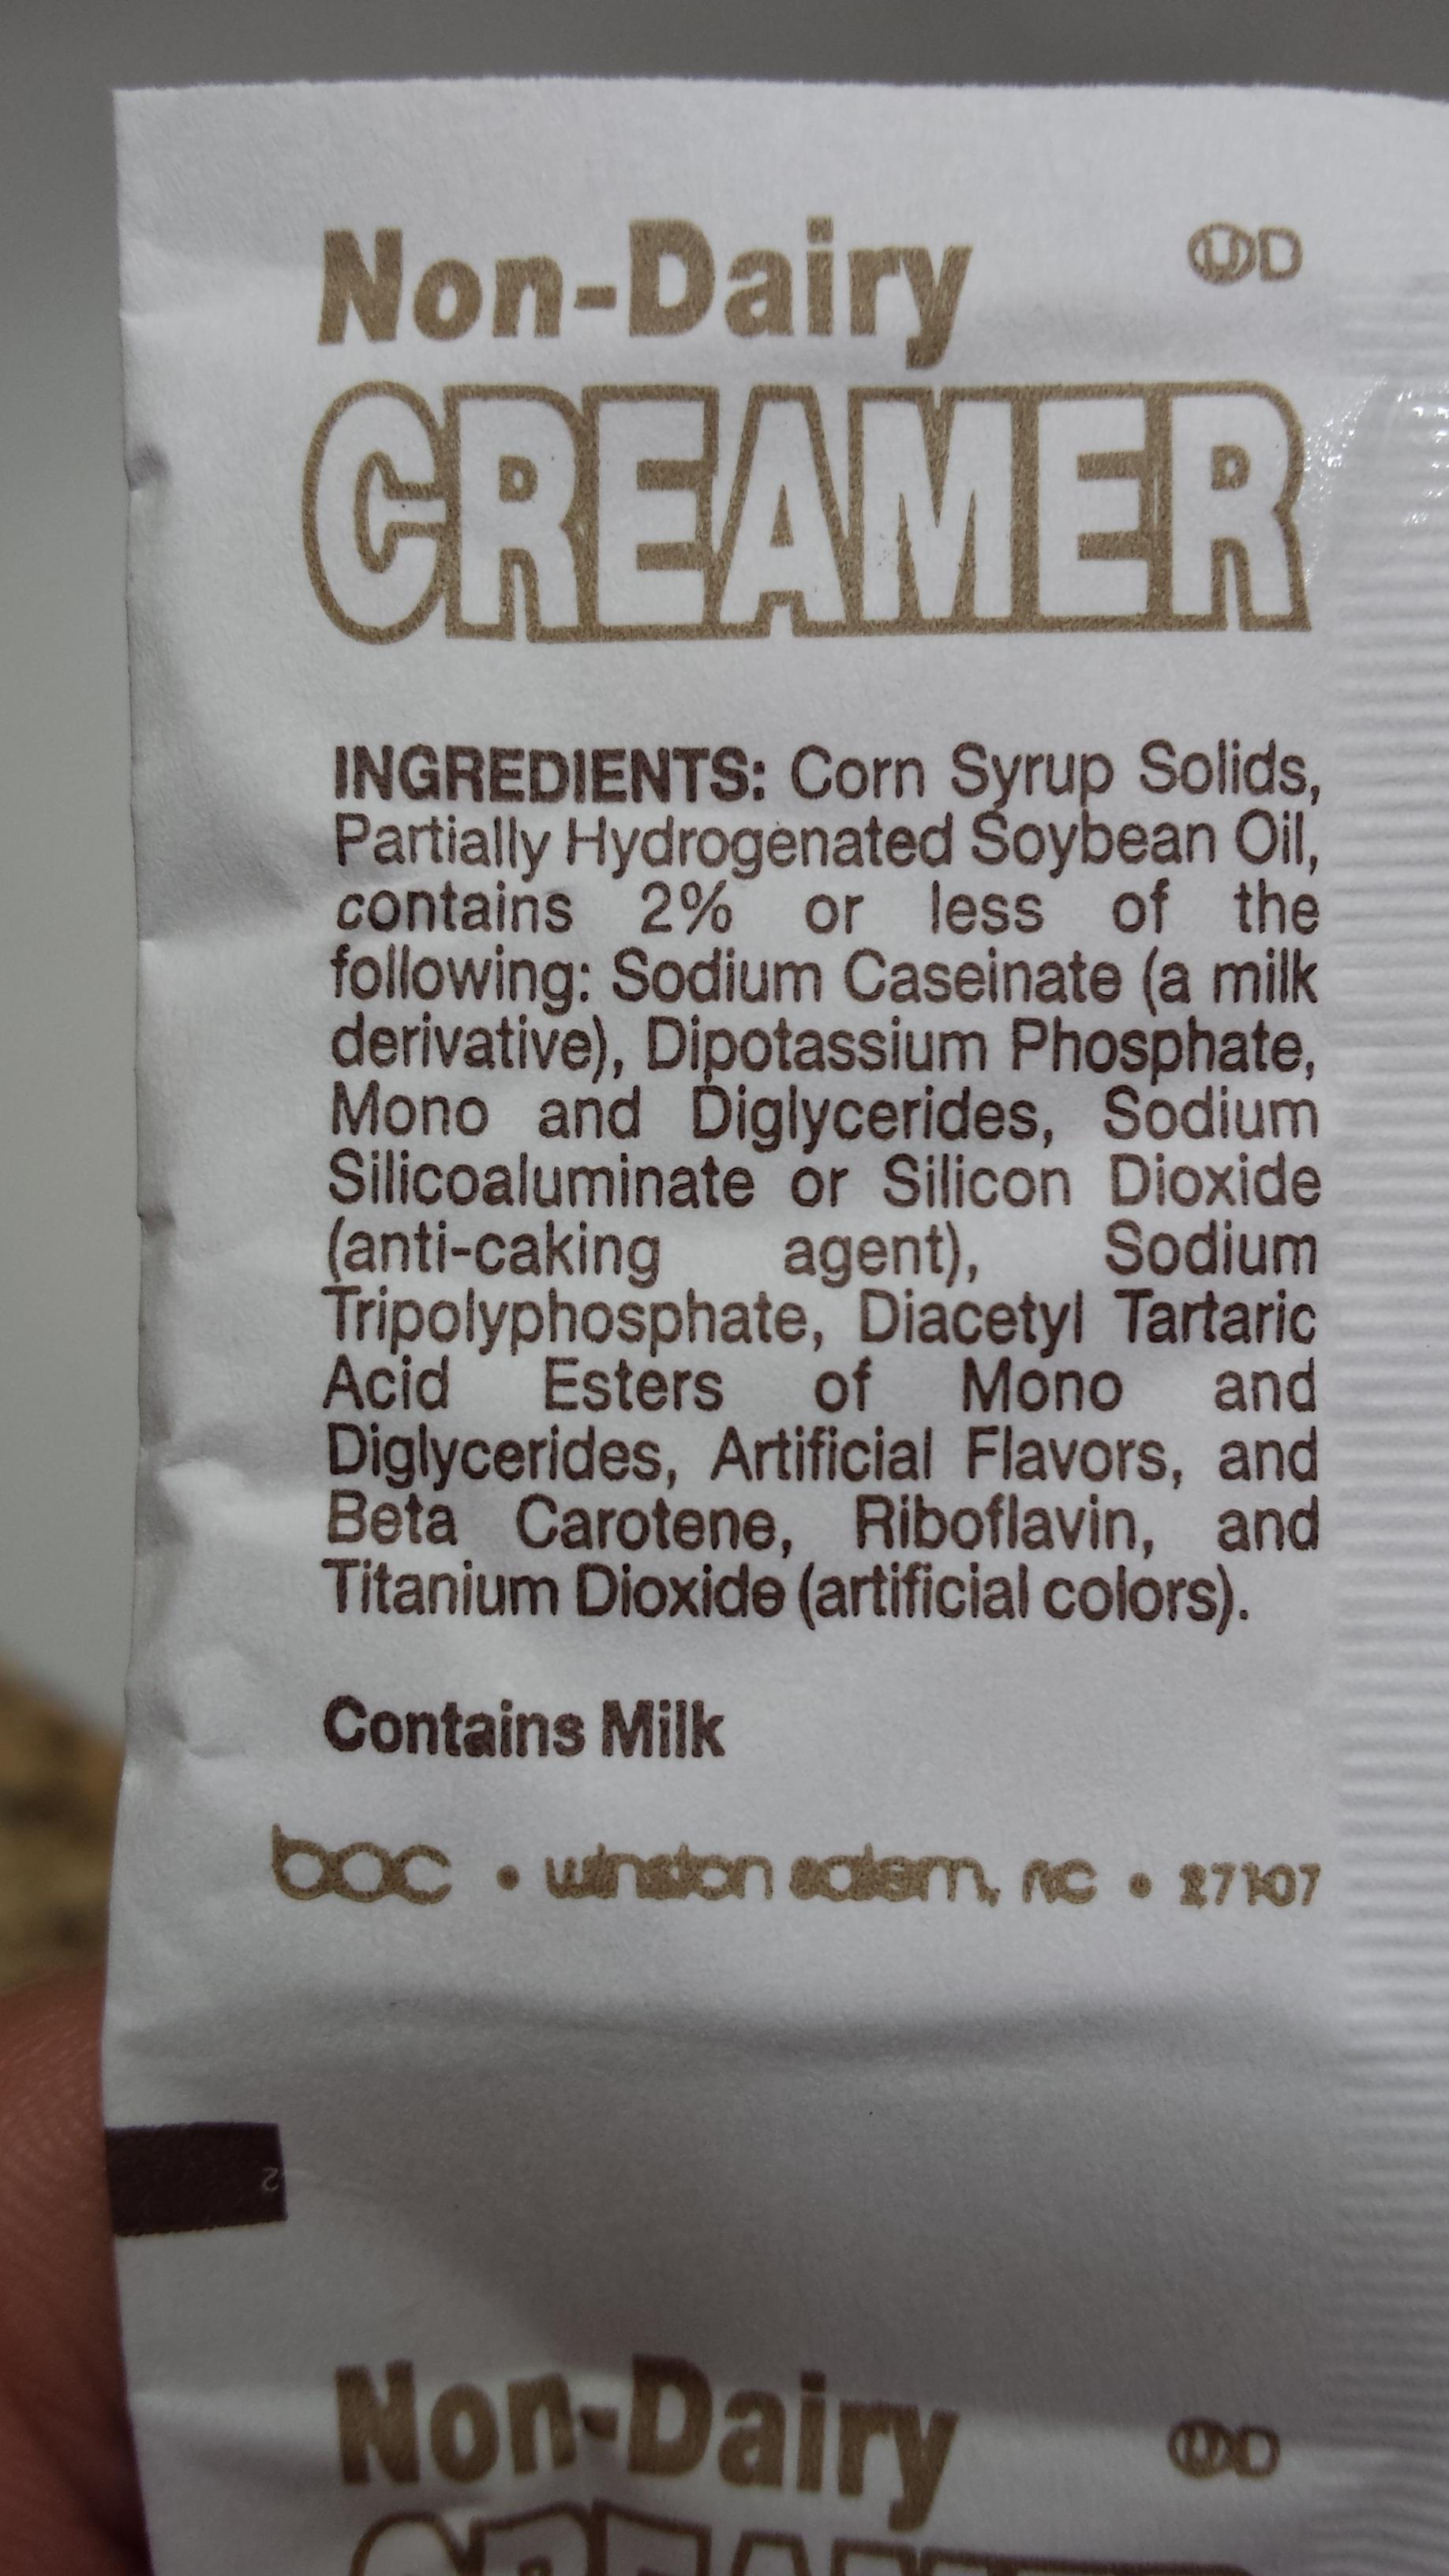 NonDairy Od Creamer Ingredients Corn Syrup Solids, Partially Hydrogenated Soybean Oil, contains 2% or less of the ing Sodium Caseinate a milk derivative, Dipotassium Phosphate, Mono and Diglycerides, Sodium Silicoaluminate or Silicon Dioxide anticaking…